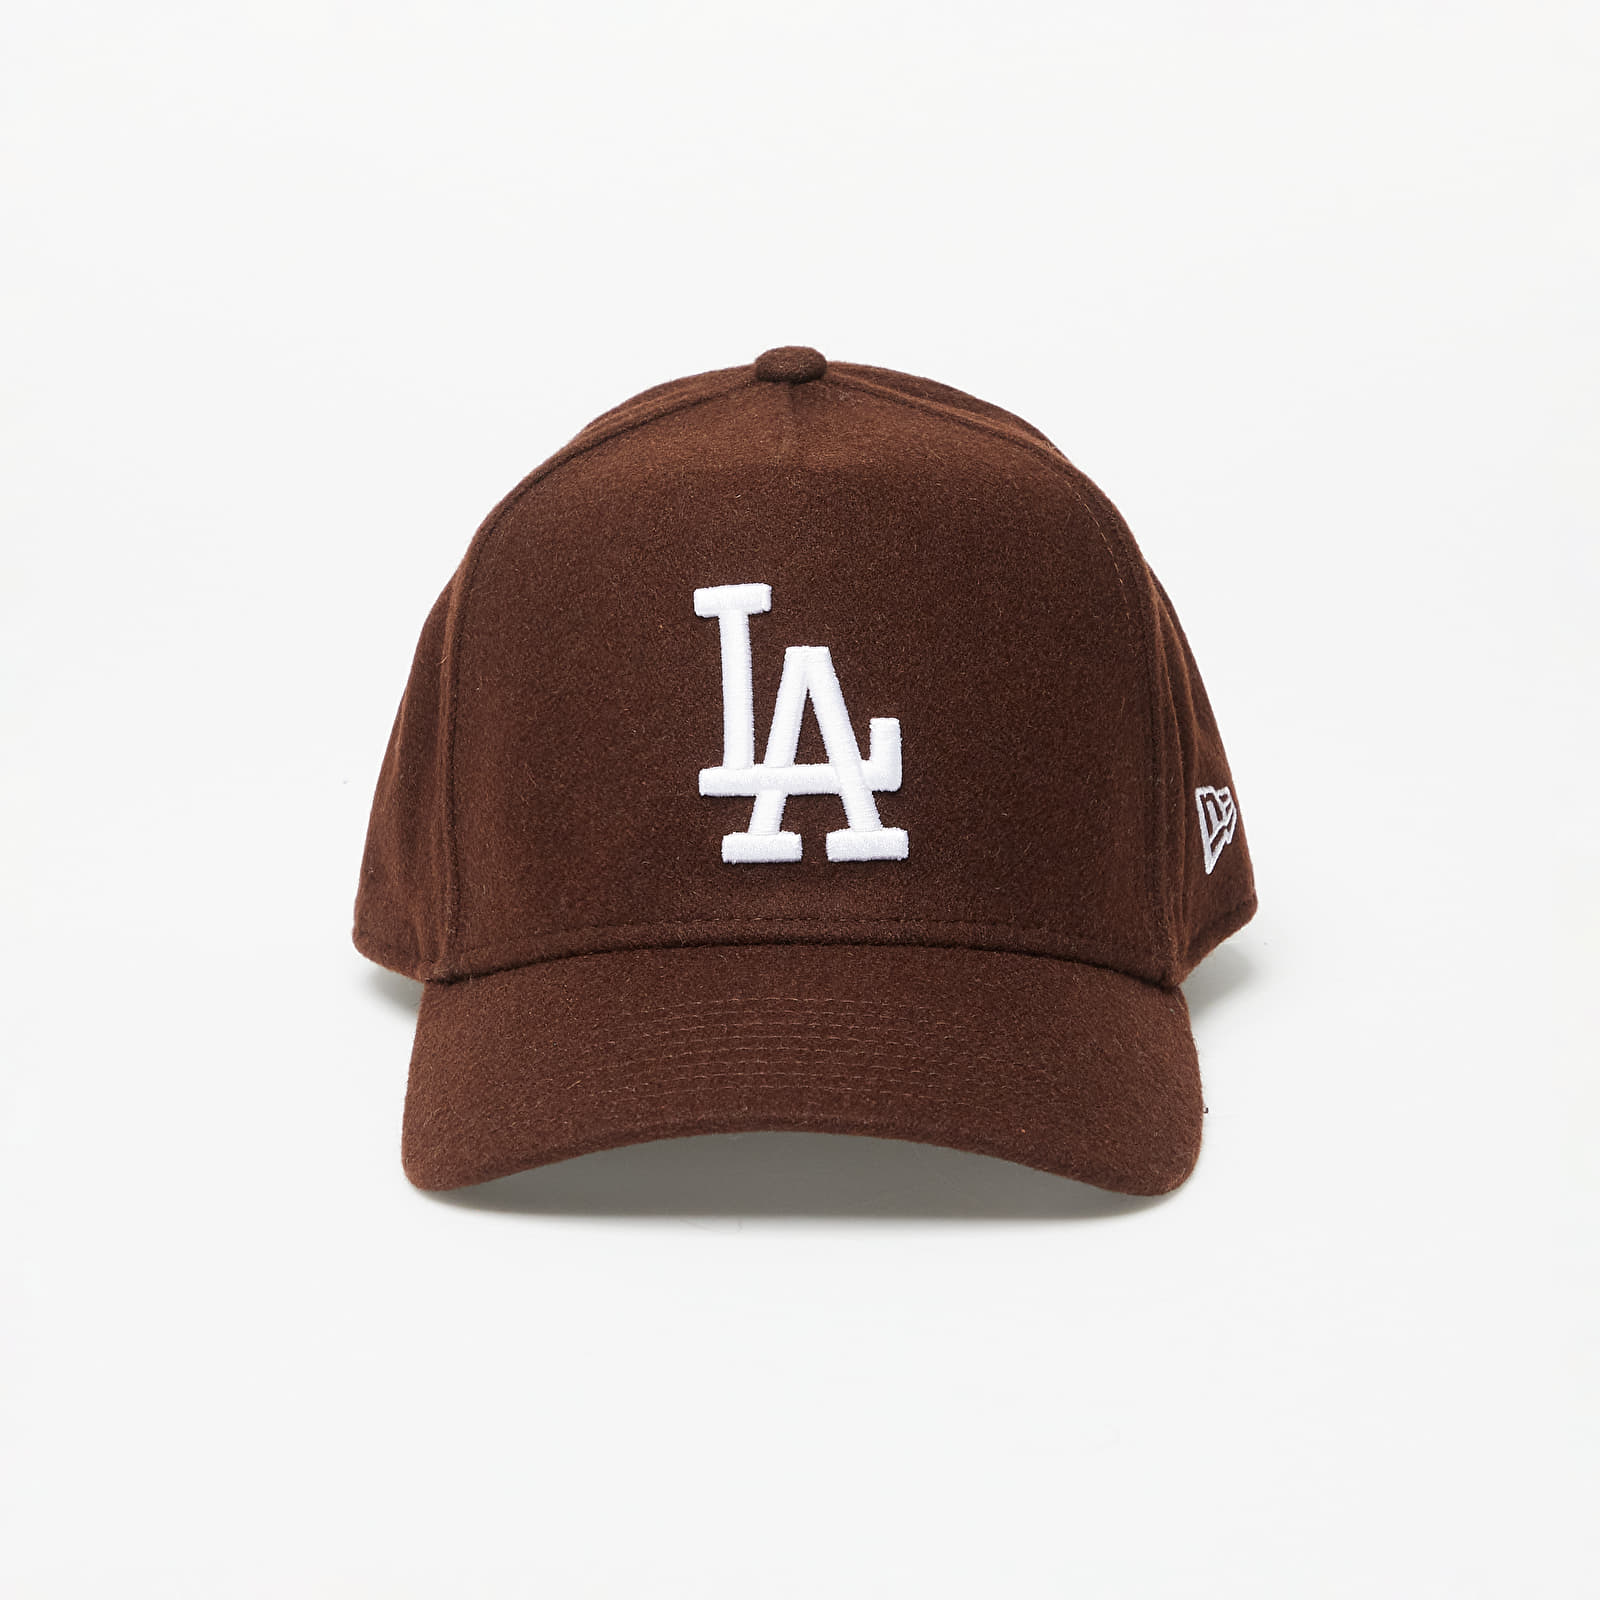 Caps New Era Los Angeles Dodgers Melton Wool A-Frame Trucker Cap Nfl Brown Suede/ White